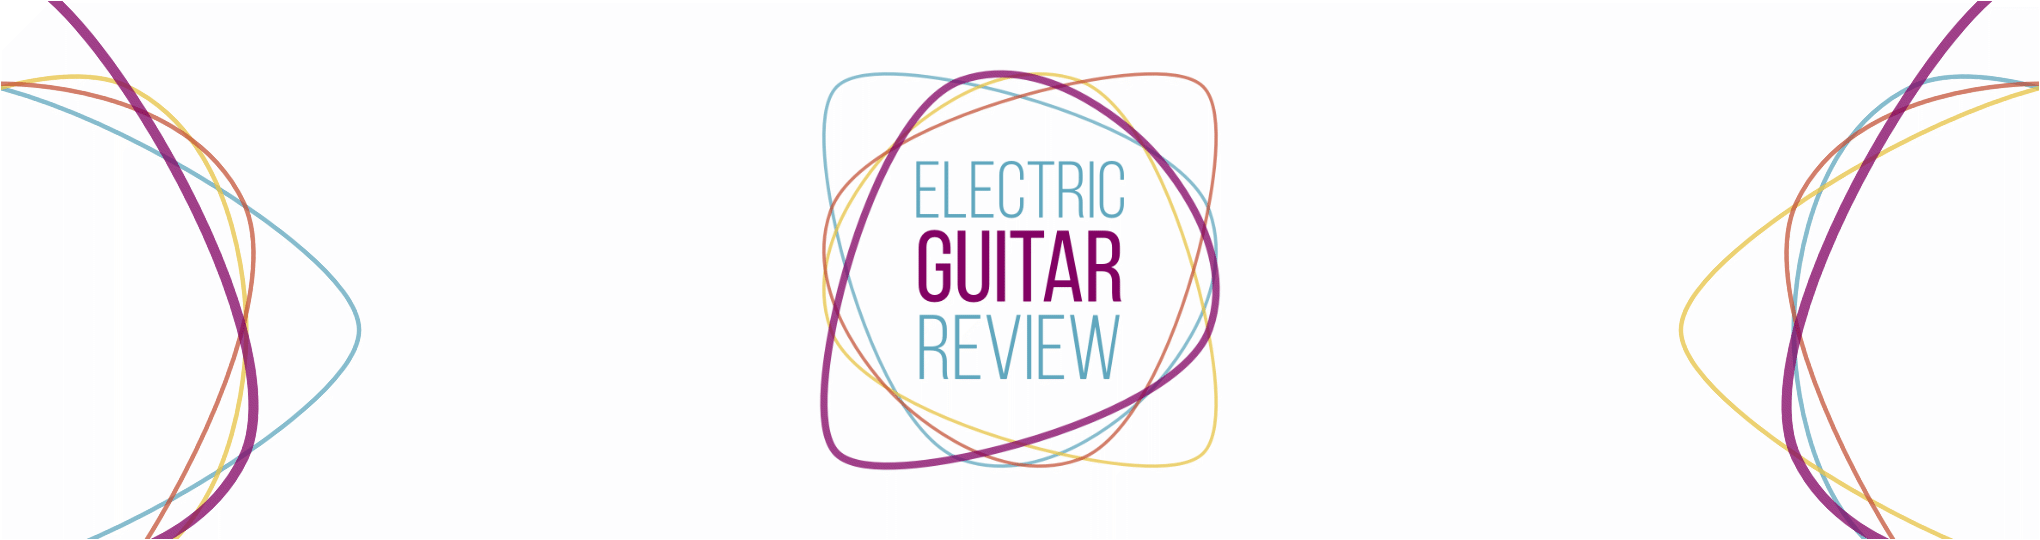 Electric Guitar Review